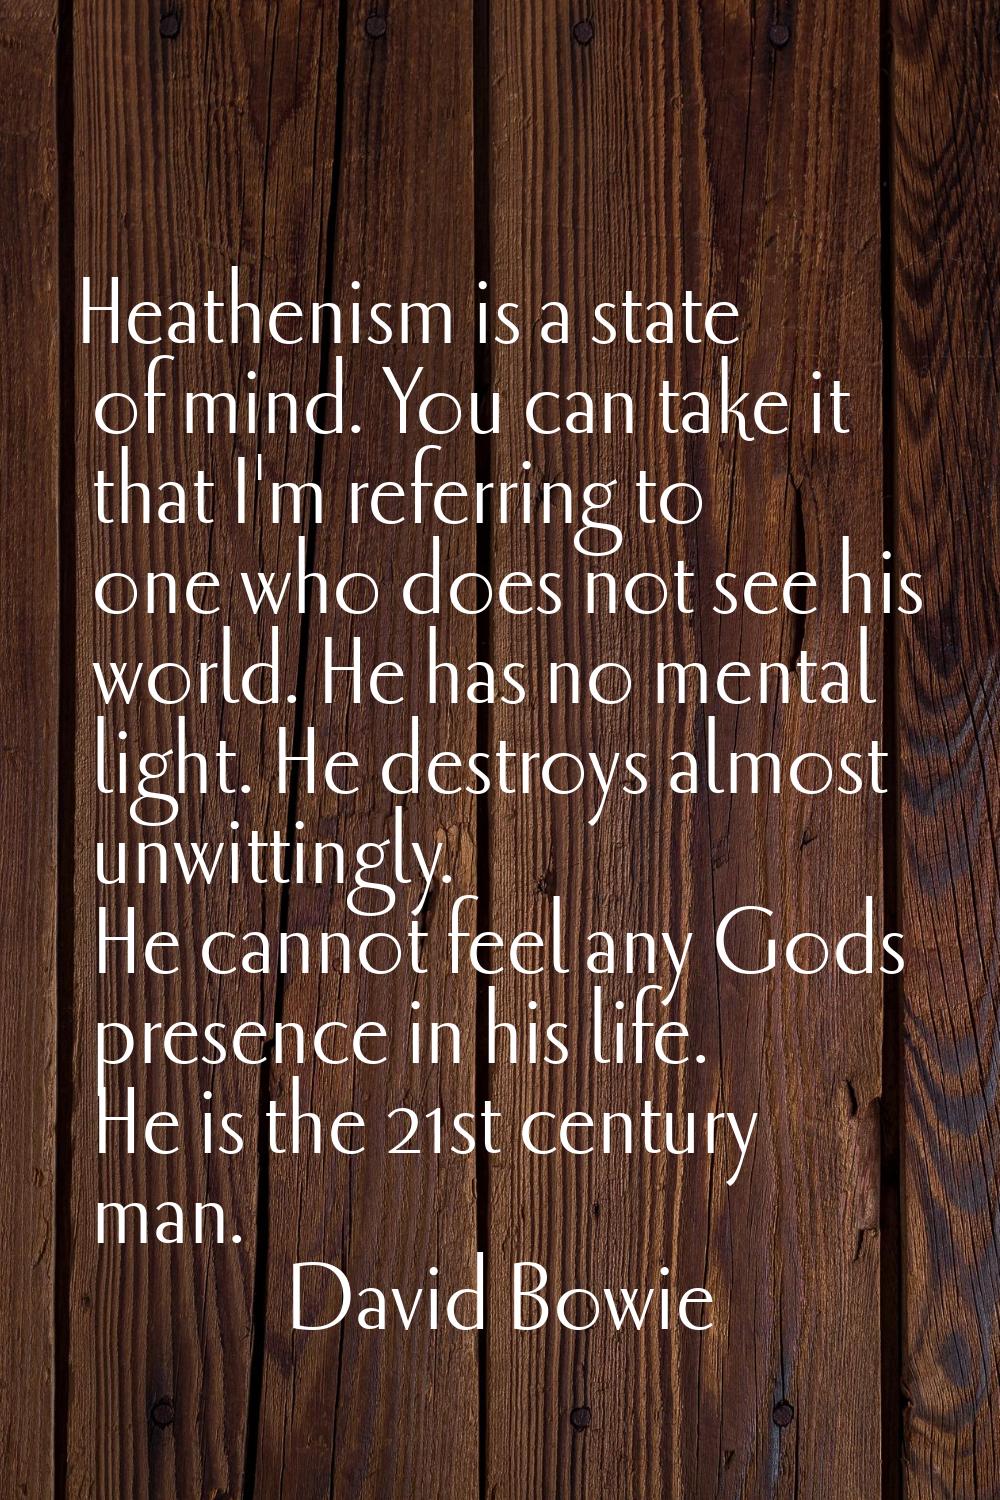 Heathenism is a state of mind. You can take it that I'm referring to one who does not see his world